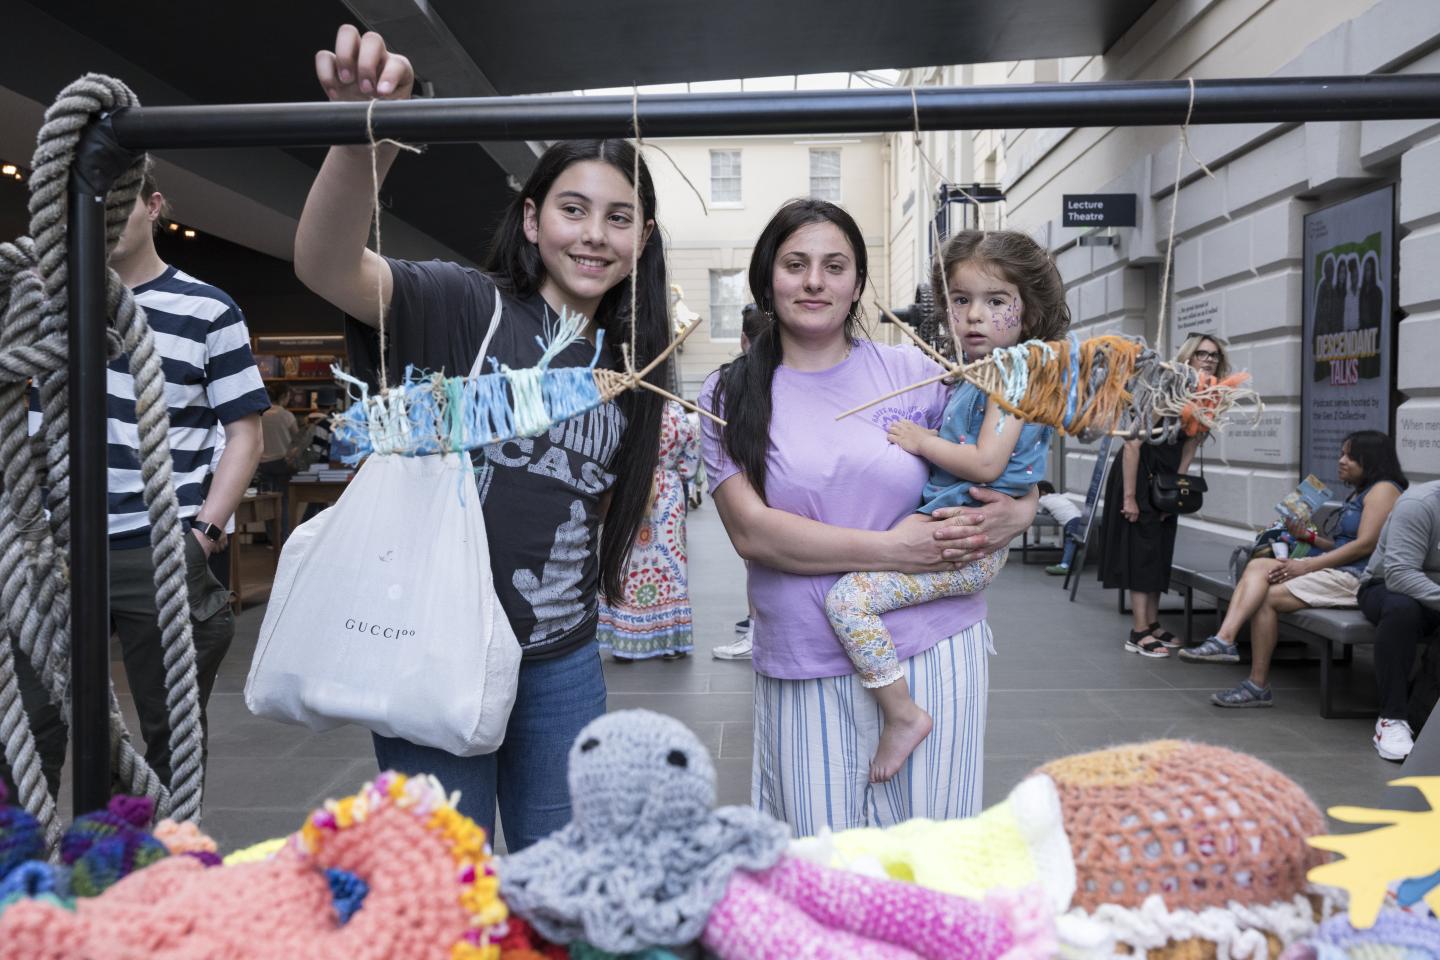 A young family take part in a craft activity at the National Maritime Museum